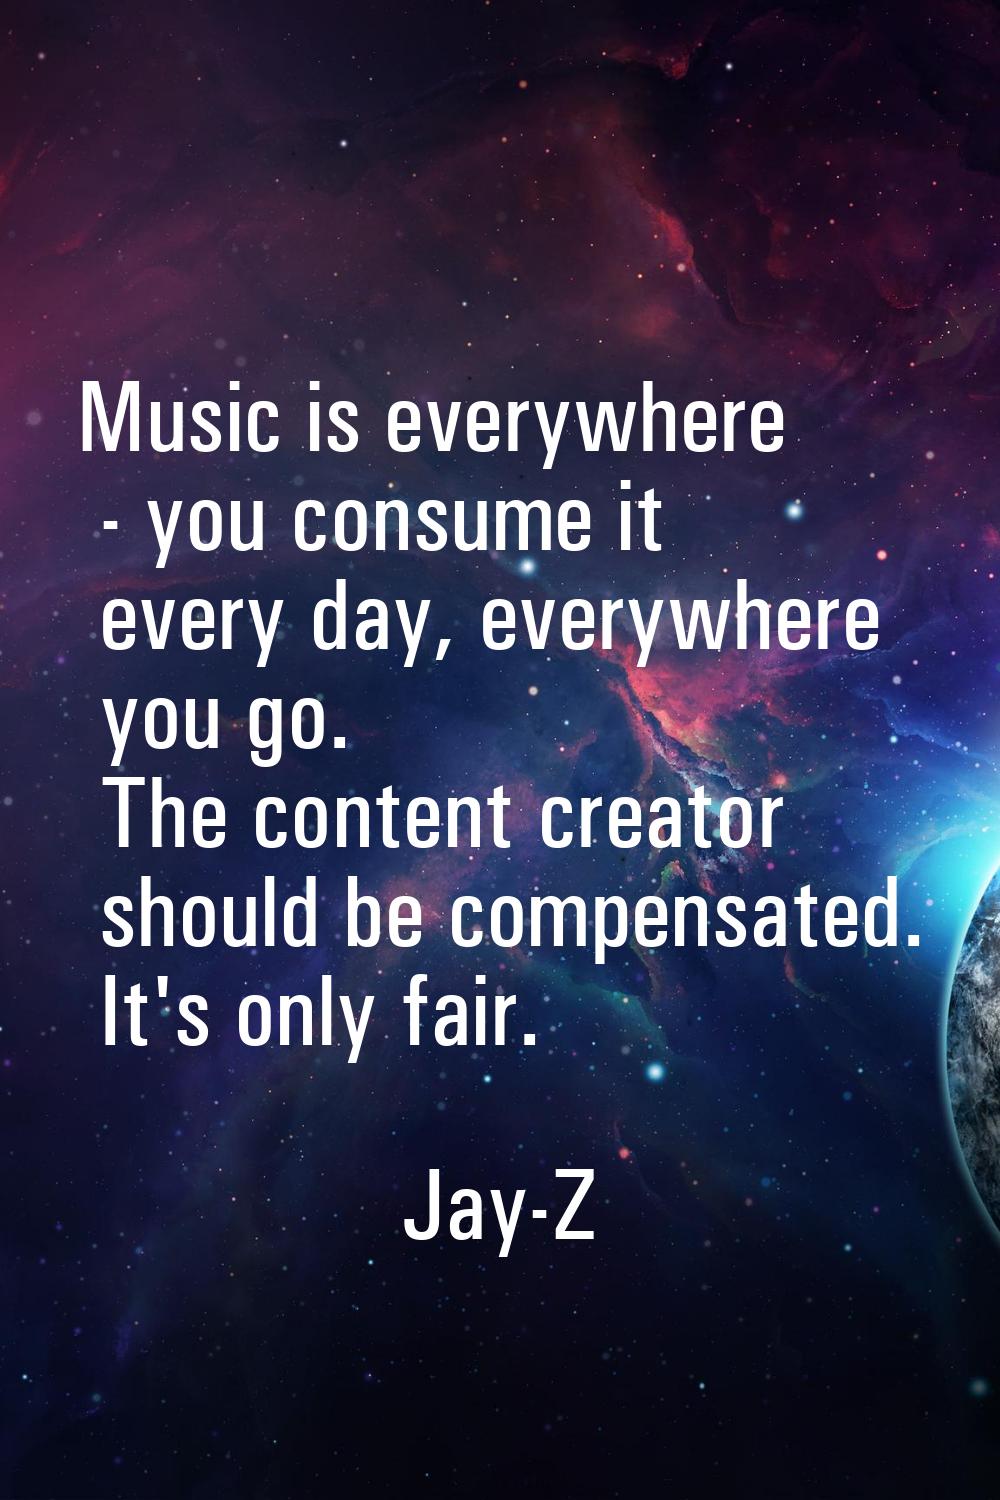 Music is everywhere - you consume it every day, everywhere you go. The content creator should be co